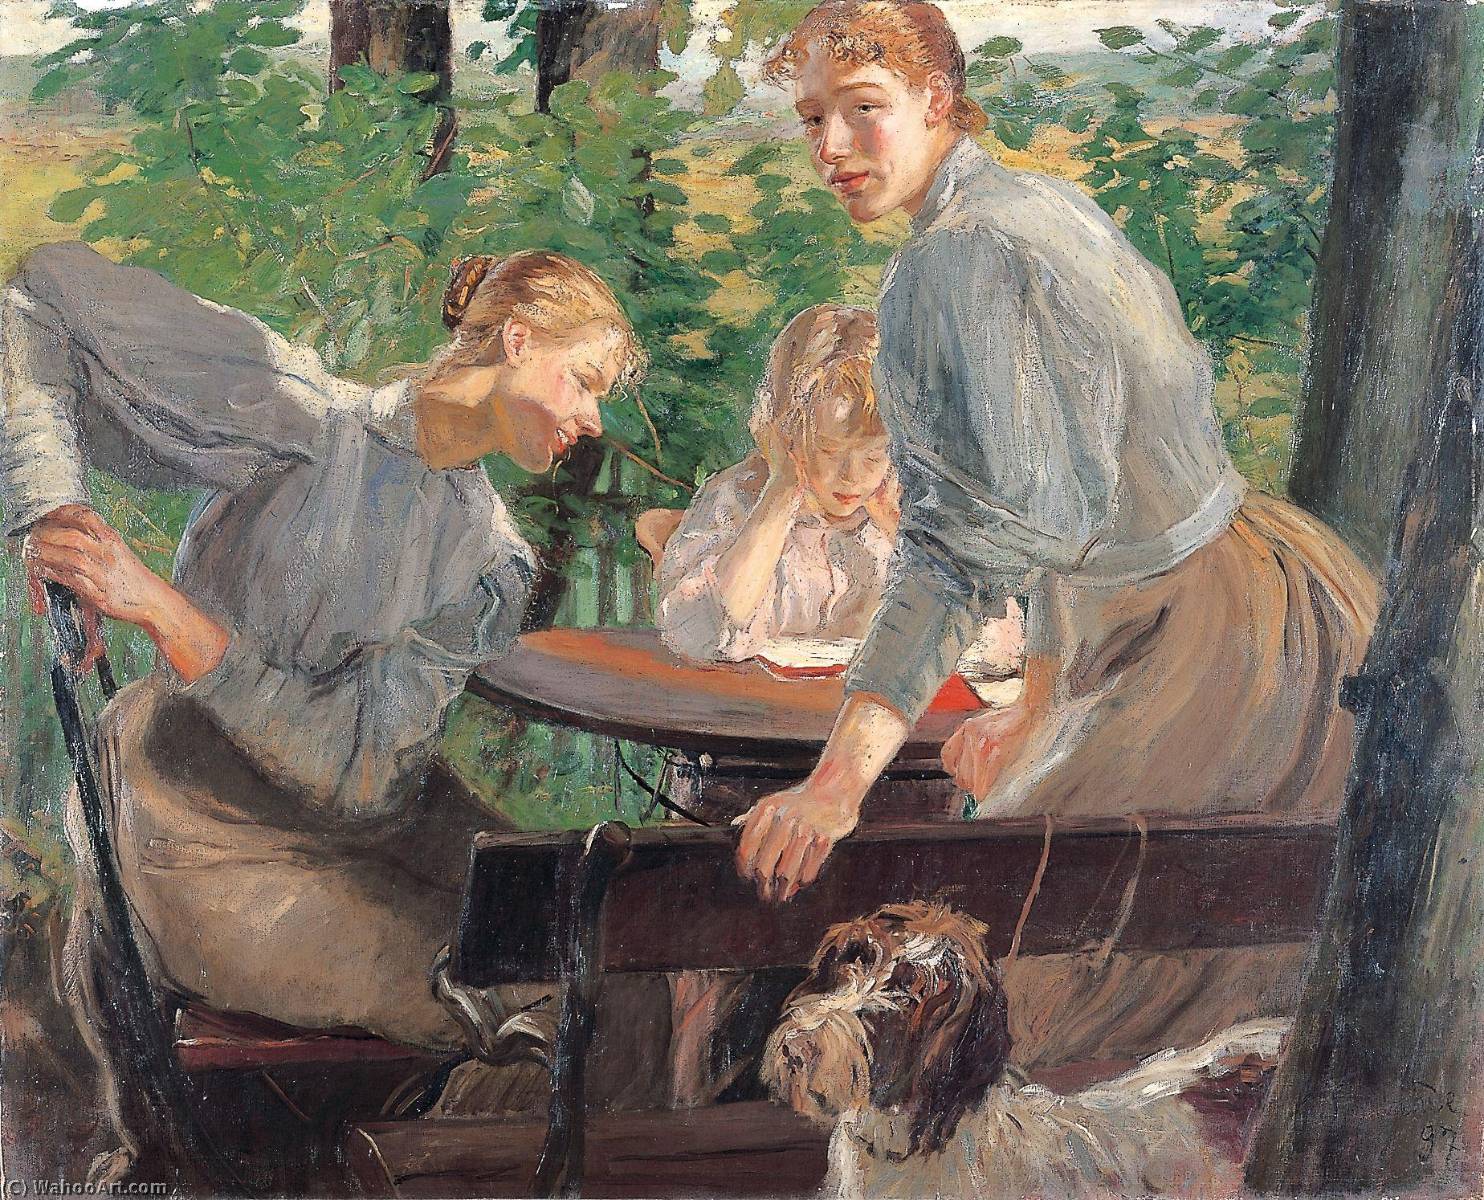 Order Oil Painting Replica The Daughters of the artist in the garden, 1897 by Fritz Von Uhde (1848-1911) | ArtsDot.com